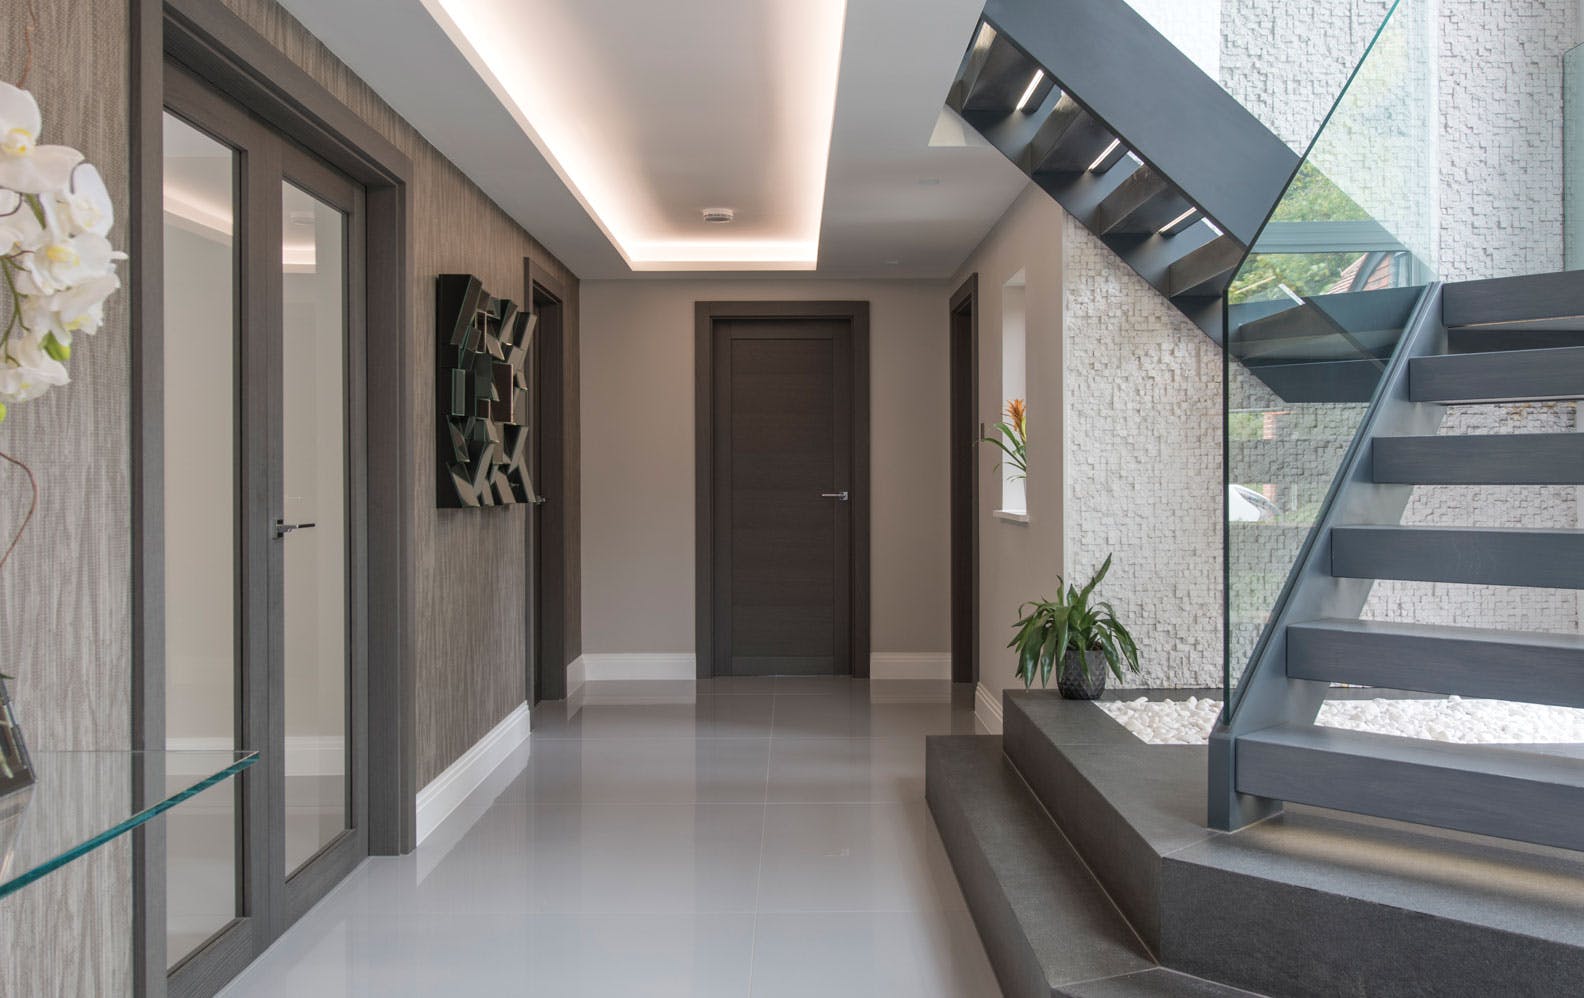 A contemporary hallway and staircase with a combination of double and single door sets, and solid and glazed Gio door designs by Deuren, all finished in Grey Oak to harmonise with the grey interior.